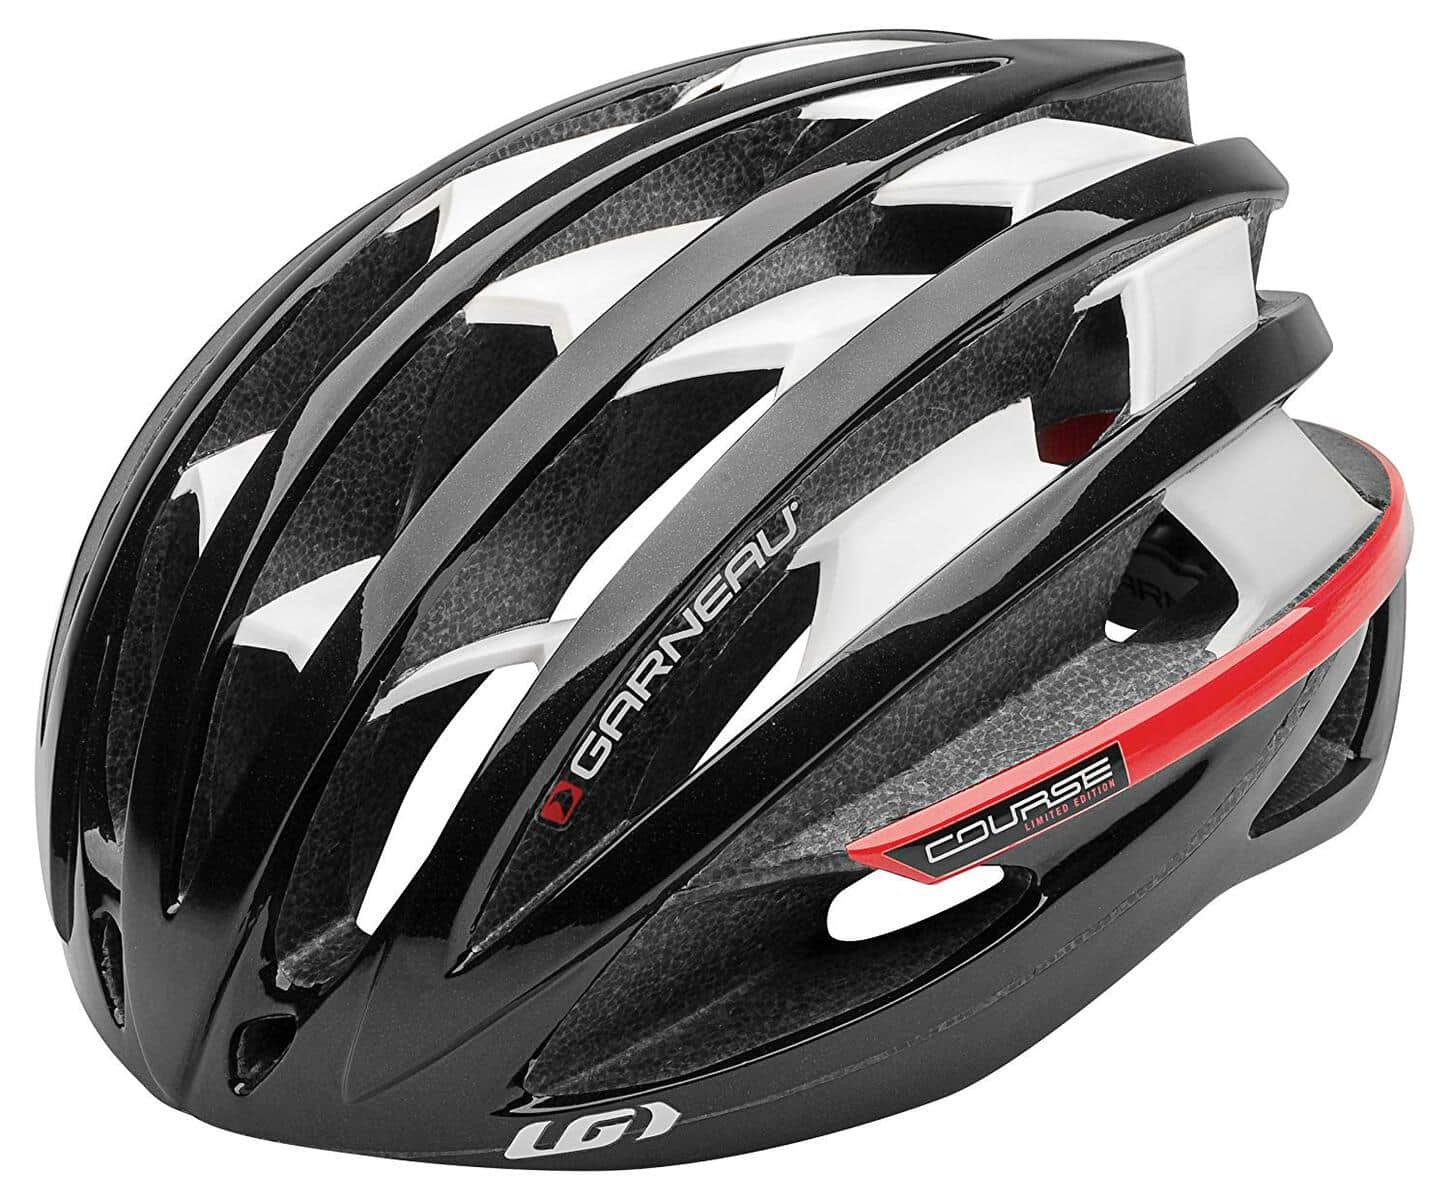 The Best and Safest Cycling Helmets in 2022 - Scientifically Tested 10